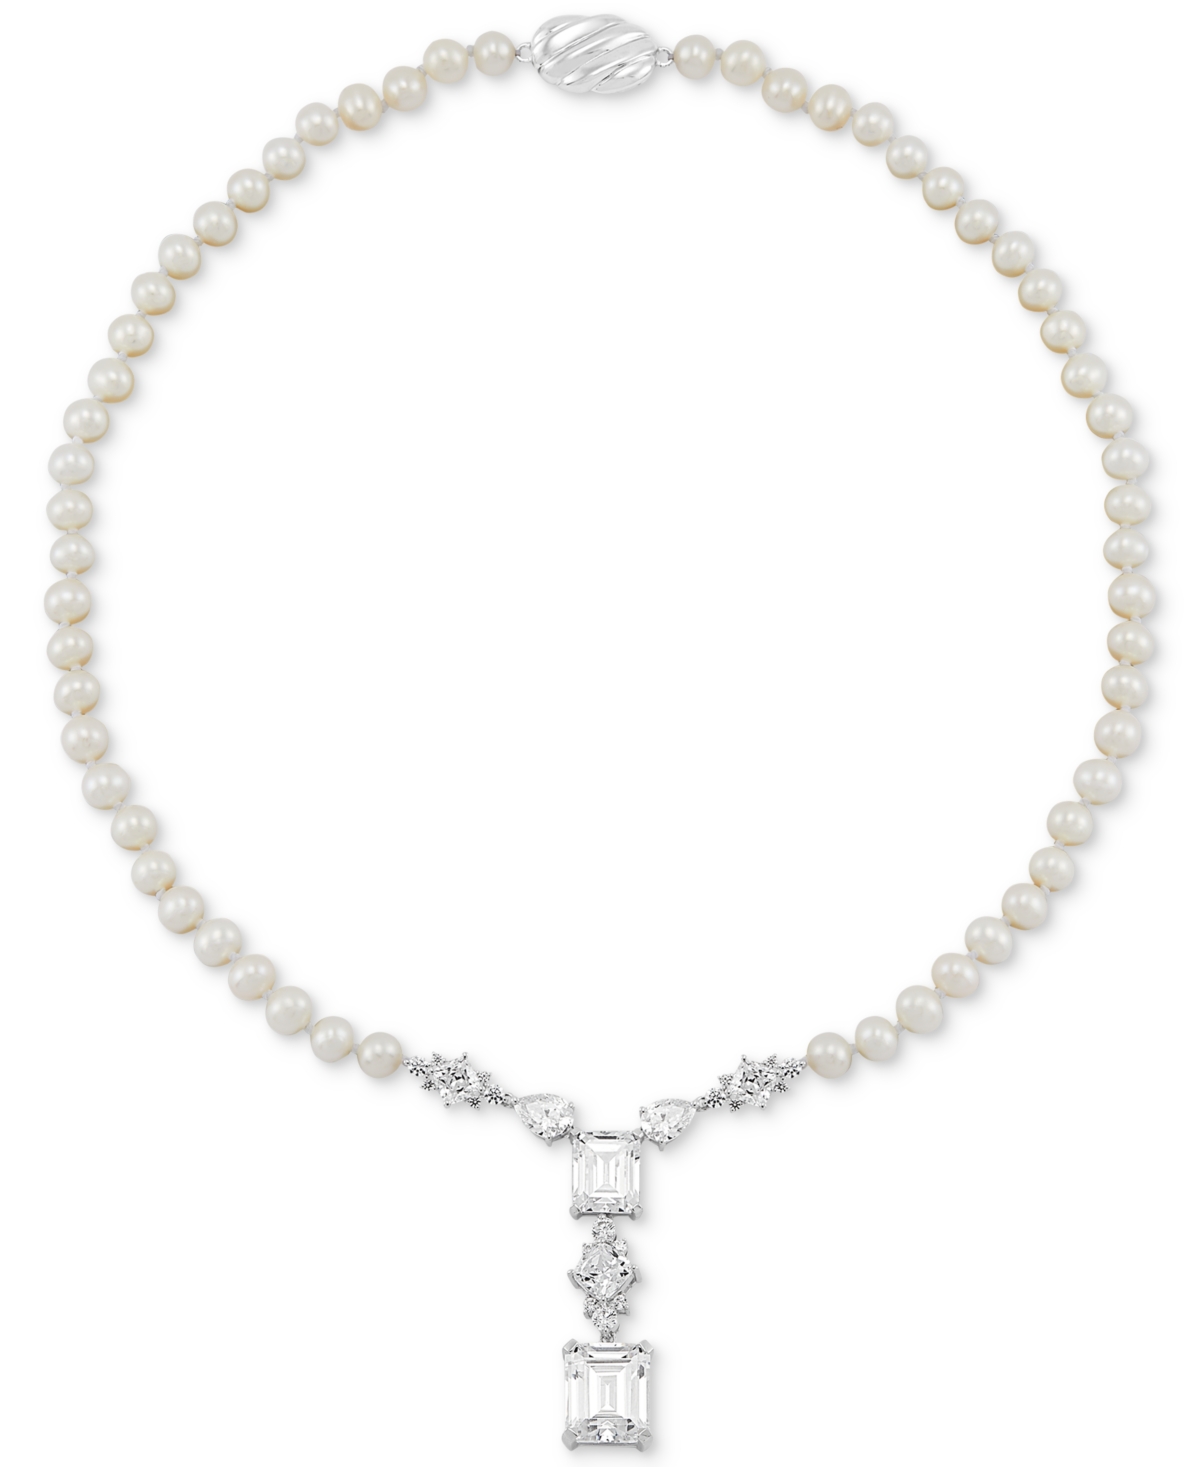 Cultured Freshwater Pearl (5-6mm) & Cubic Zirconia 18" Statement Necklace in Sterling Silver - Sterling Silver